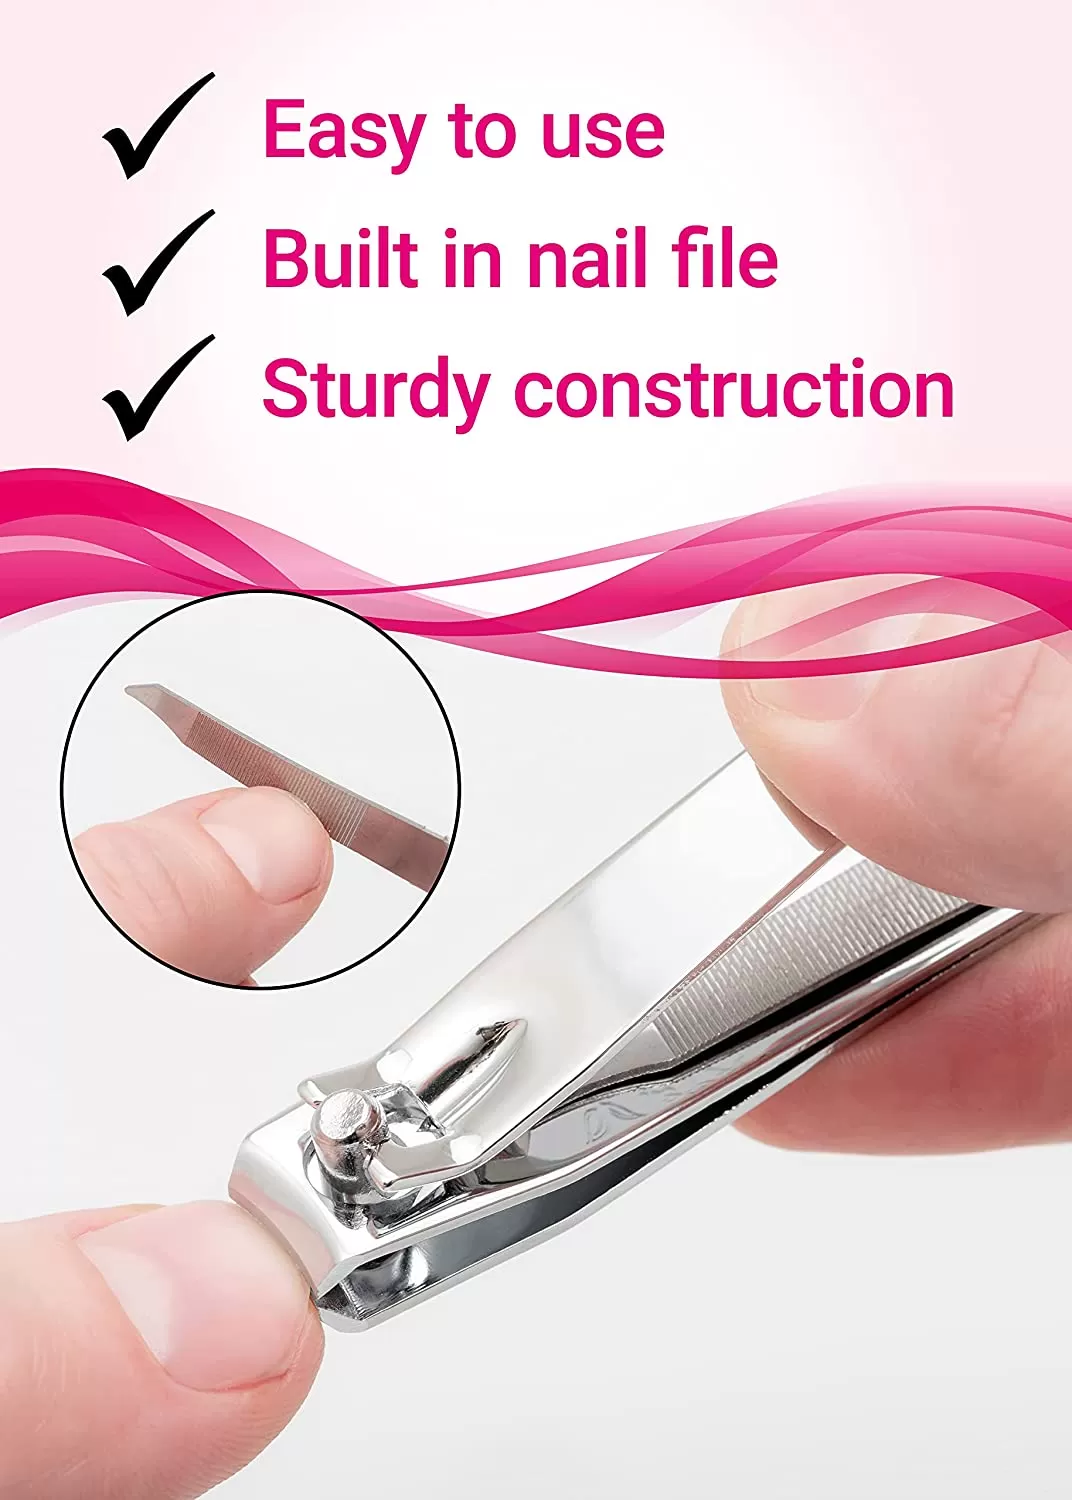 The Ultimate Guide to Choosing the Right Nail Clipper - Matgicol